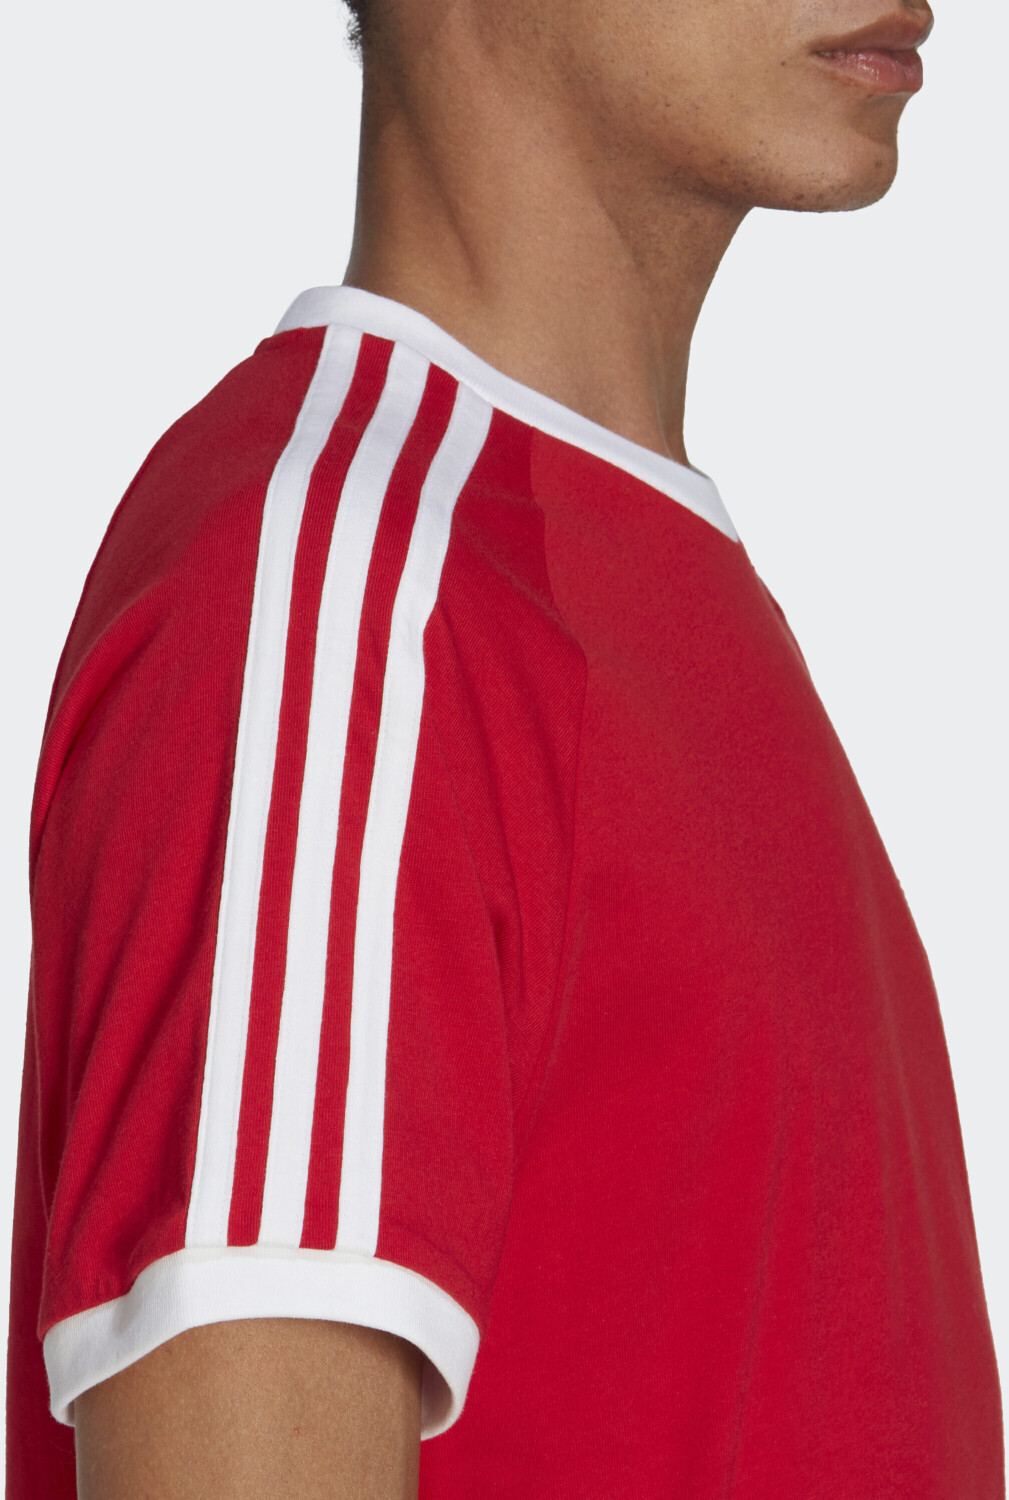 3-Stripes on – (IA4852) scarlet Best Deals from Adicolor Buy (Today) Adidas T-Shirt Classics better £27.99